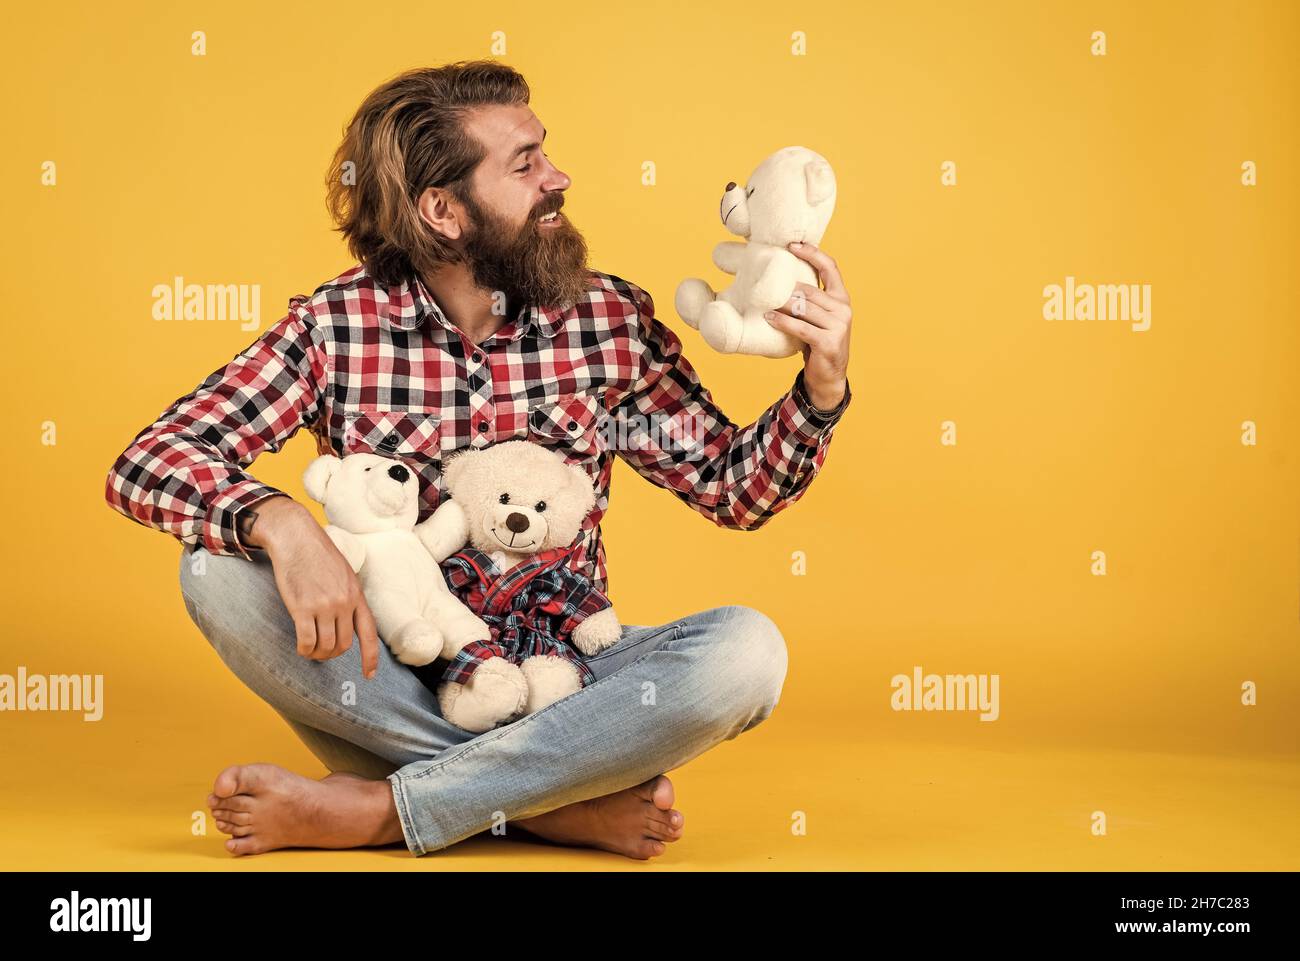 brutal bearded man wear checkered shirt having lush beard and moustache with teddy bear toy, toy shop Stock Photo